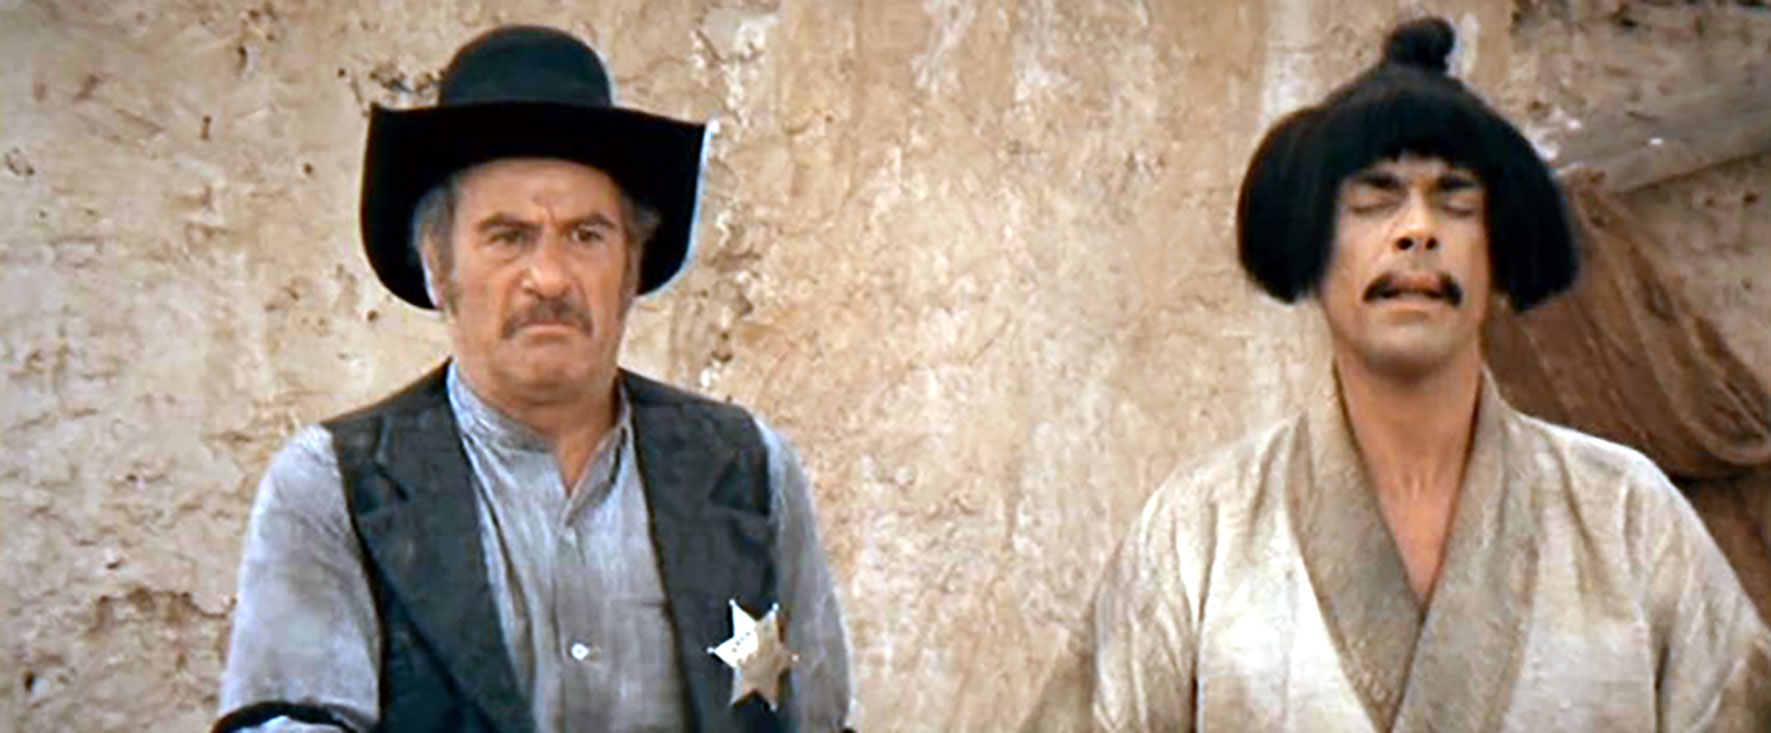 The White, the Yellow, and the Black (1975) Screenshot 5 